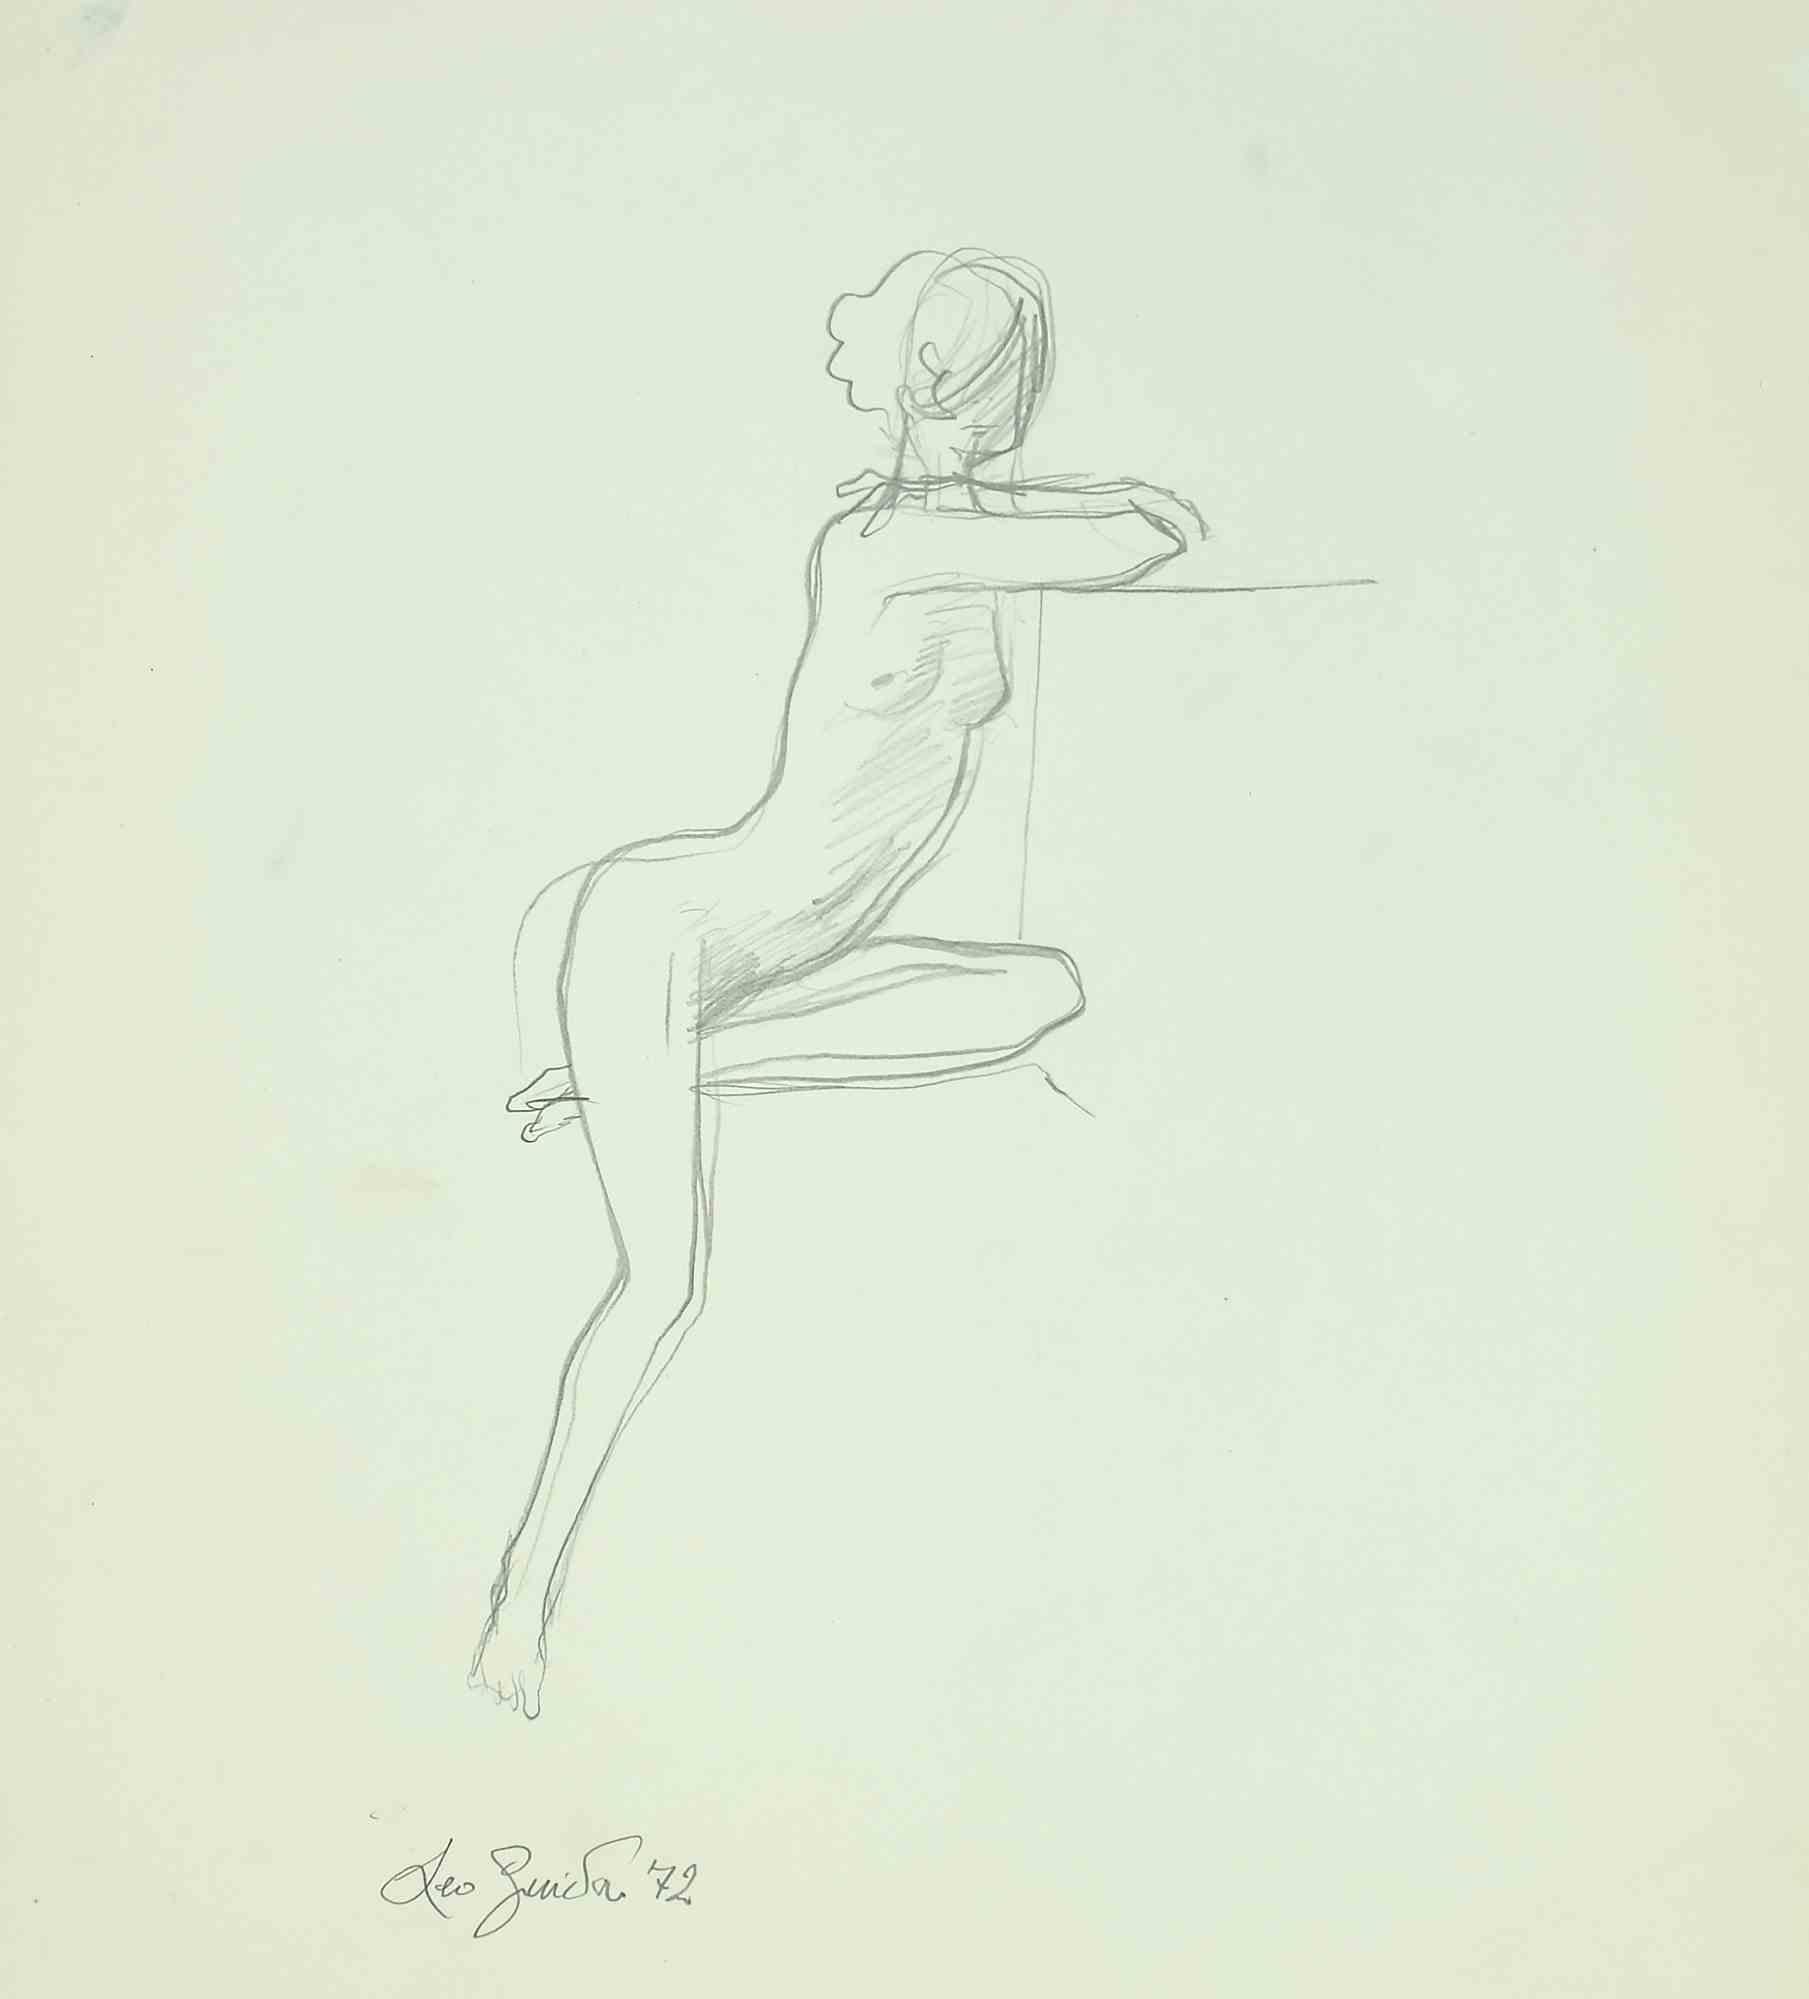 Nude is an original artwork realized  in 1972 by the italian Contemporary artist  Leo Guida  (1992 - 2017).

Original pencil drawing on ivory-colored paper.

Hand-signed and dated on the lower margins. 

Excellent conditions. 

Leo Guida  (1992 -